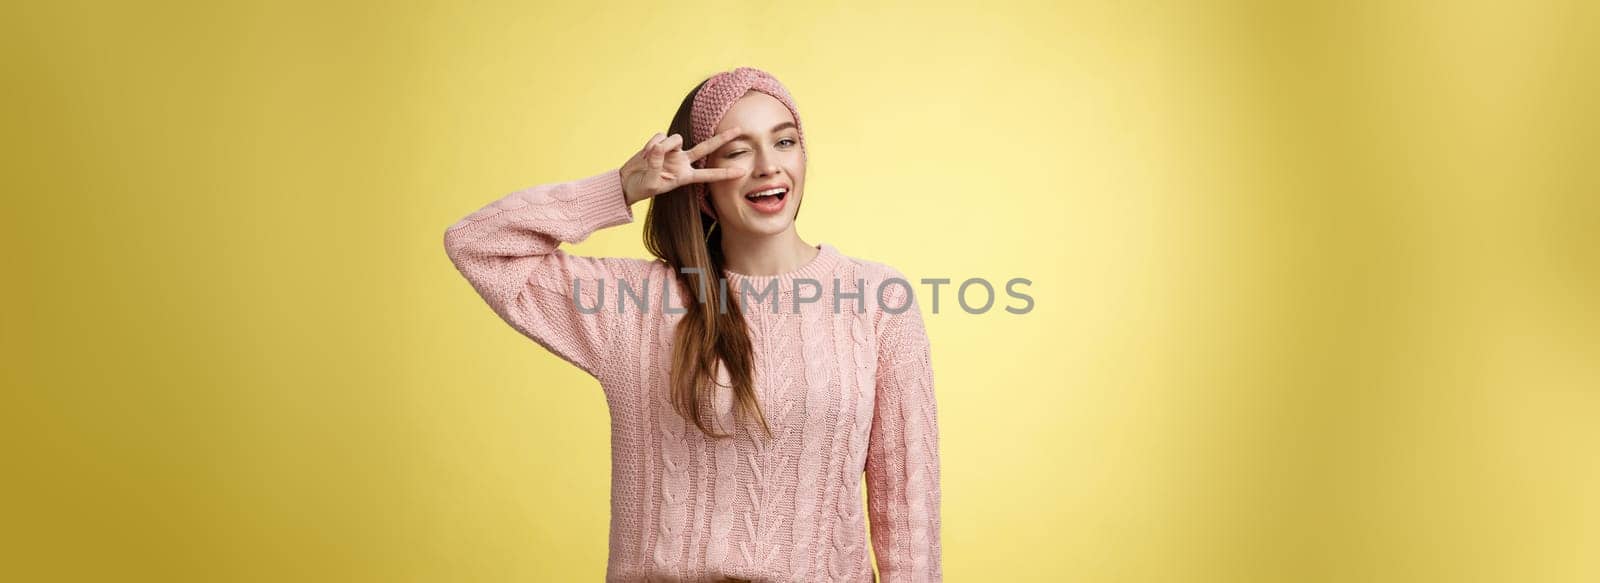 Cheerful happy glamour young european woman in pink knitted sweater, wearing headband, winking flirty and cute, showing victory or pease sign over eye, feeling excited and joyful over yellow wall.